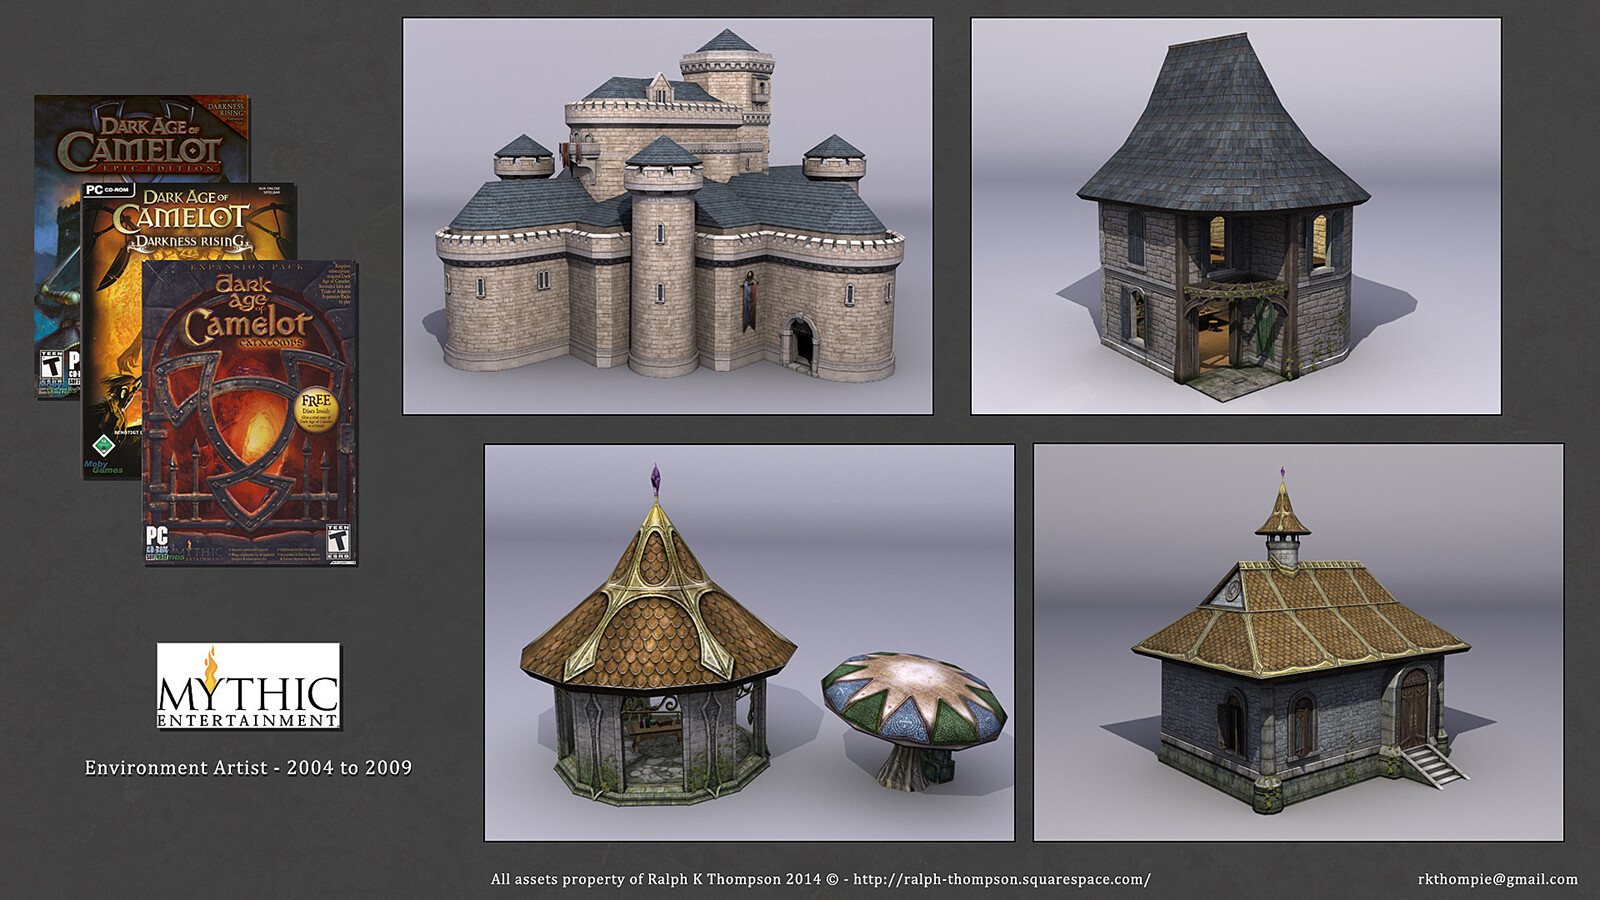 Various Dark Age of Camelot assets I worked on while at Mythic Entertainment.